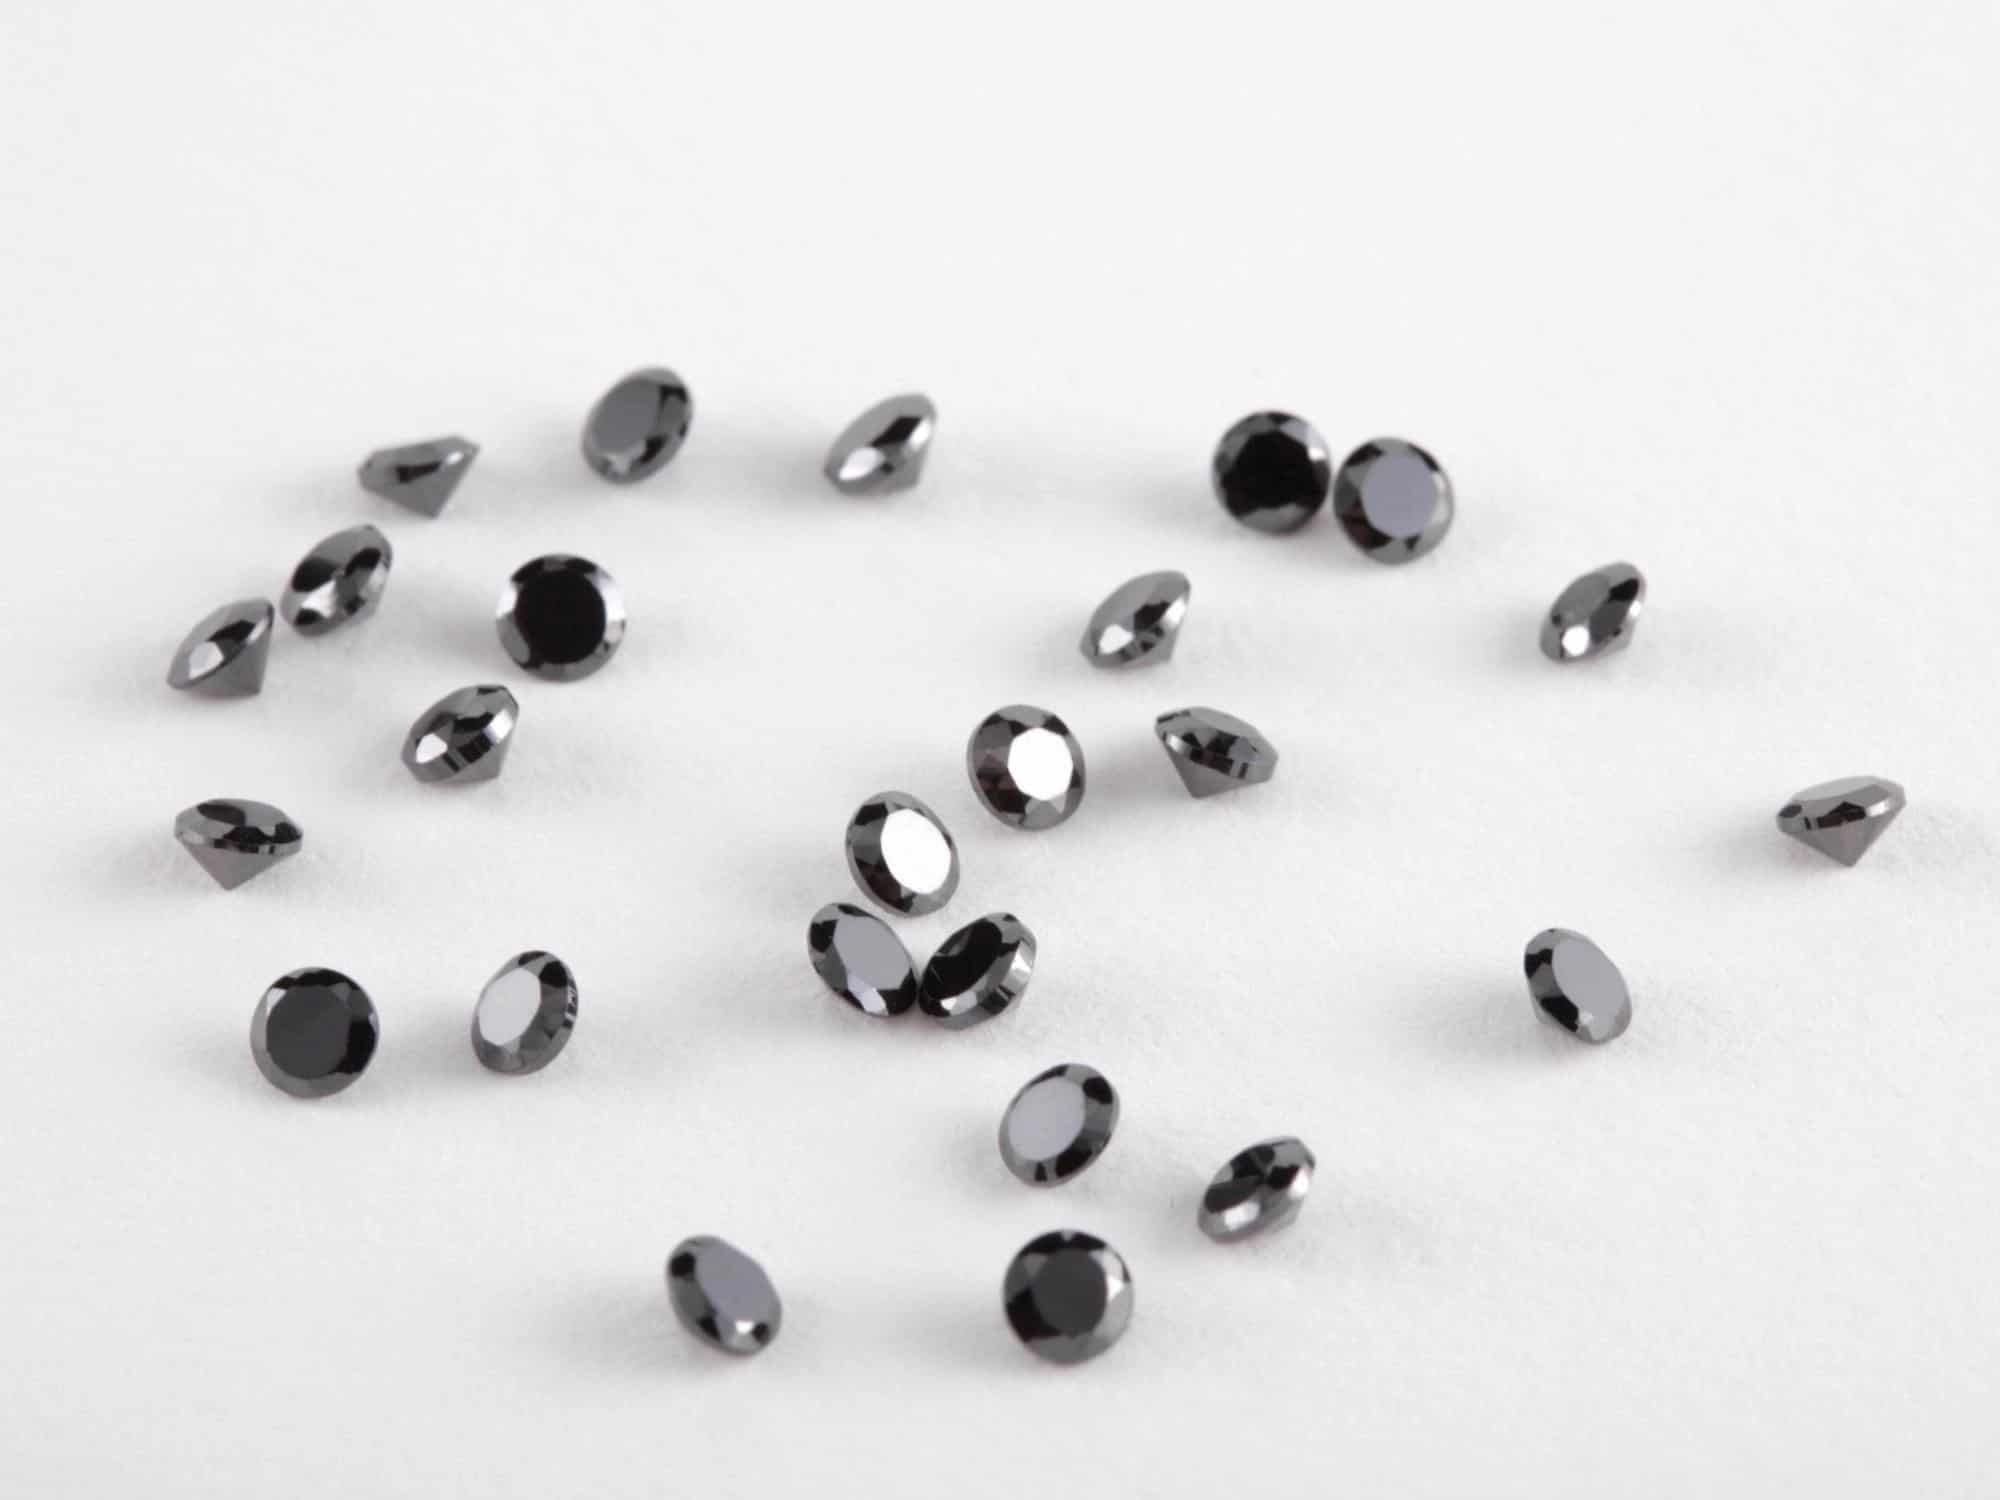 Know the Type of Black Diamond You Have